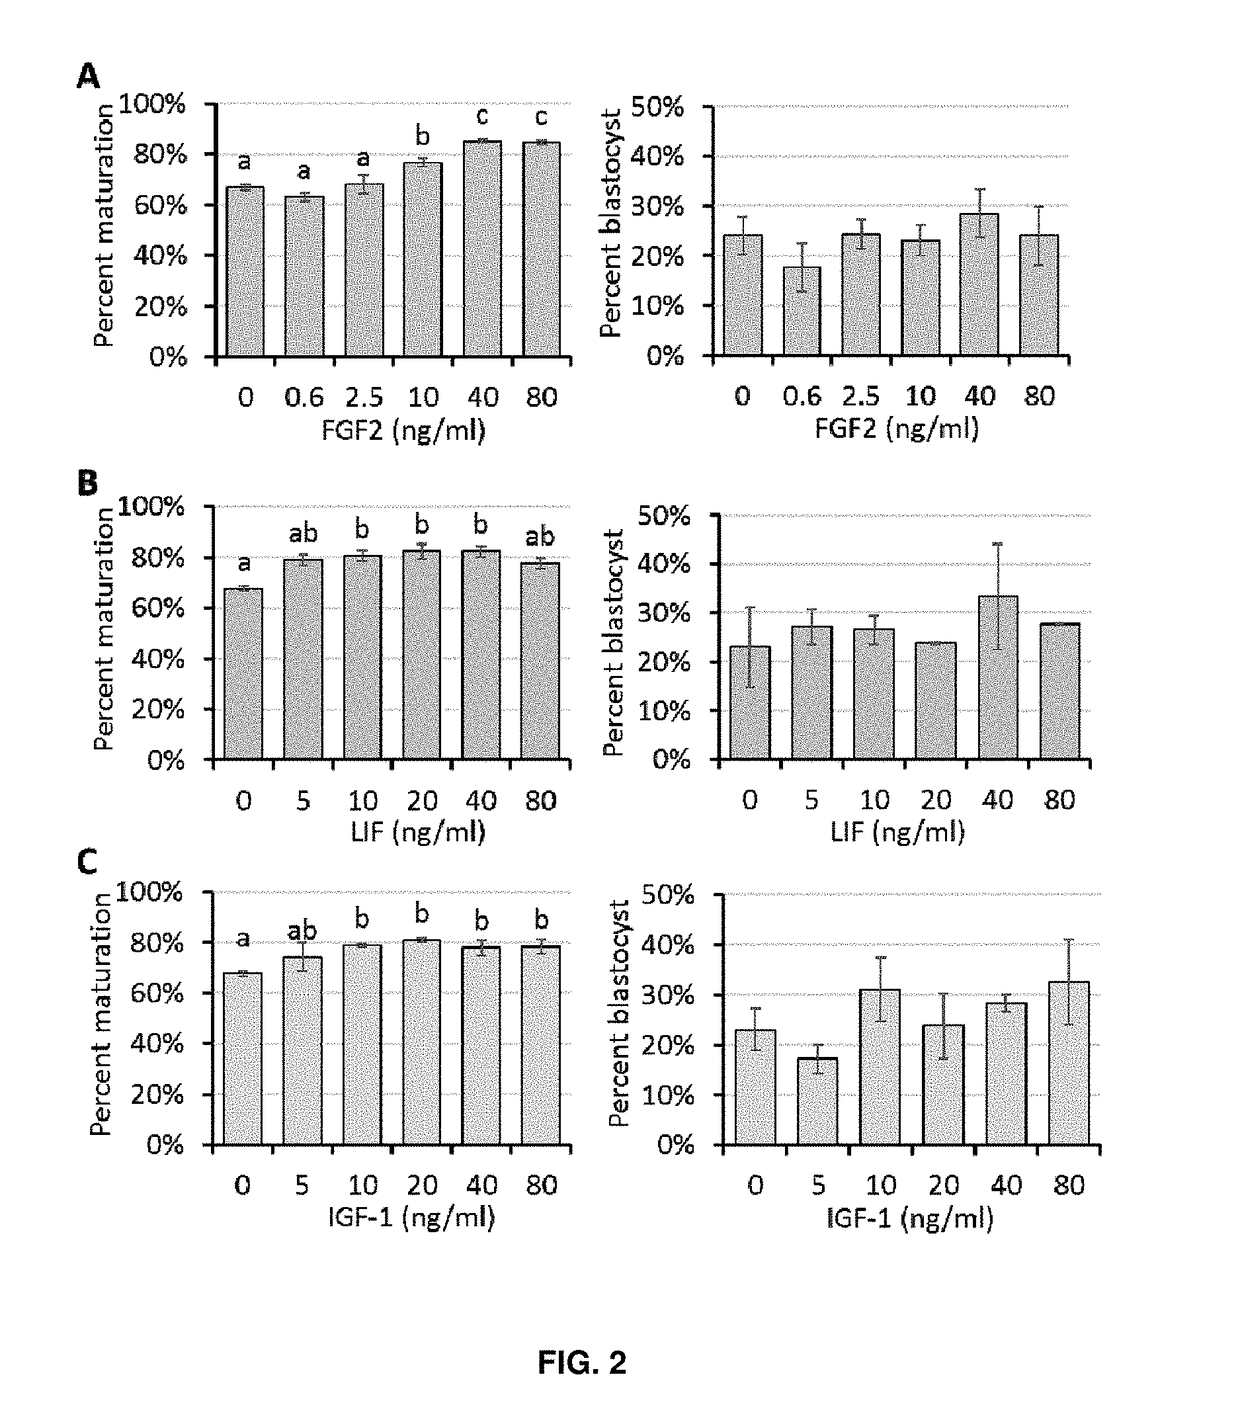 Medium supplement to increase the efficiency of oocyte maturation and embryo culture in vitro